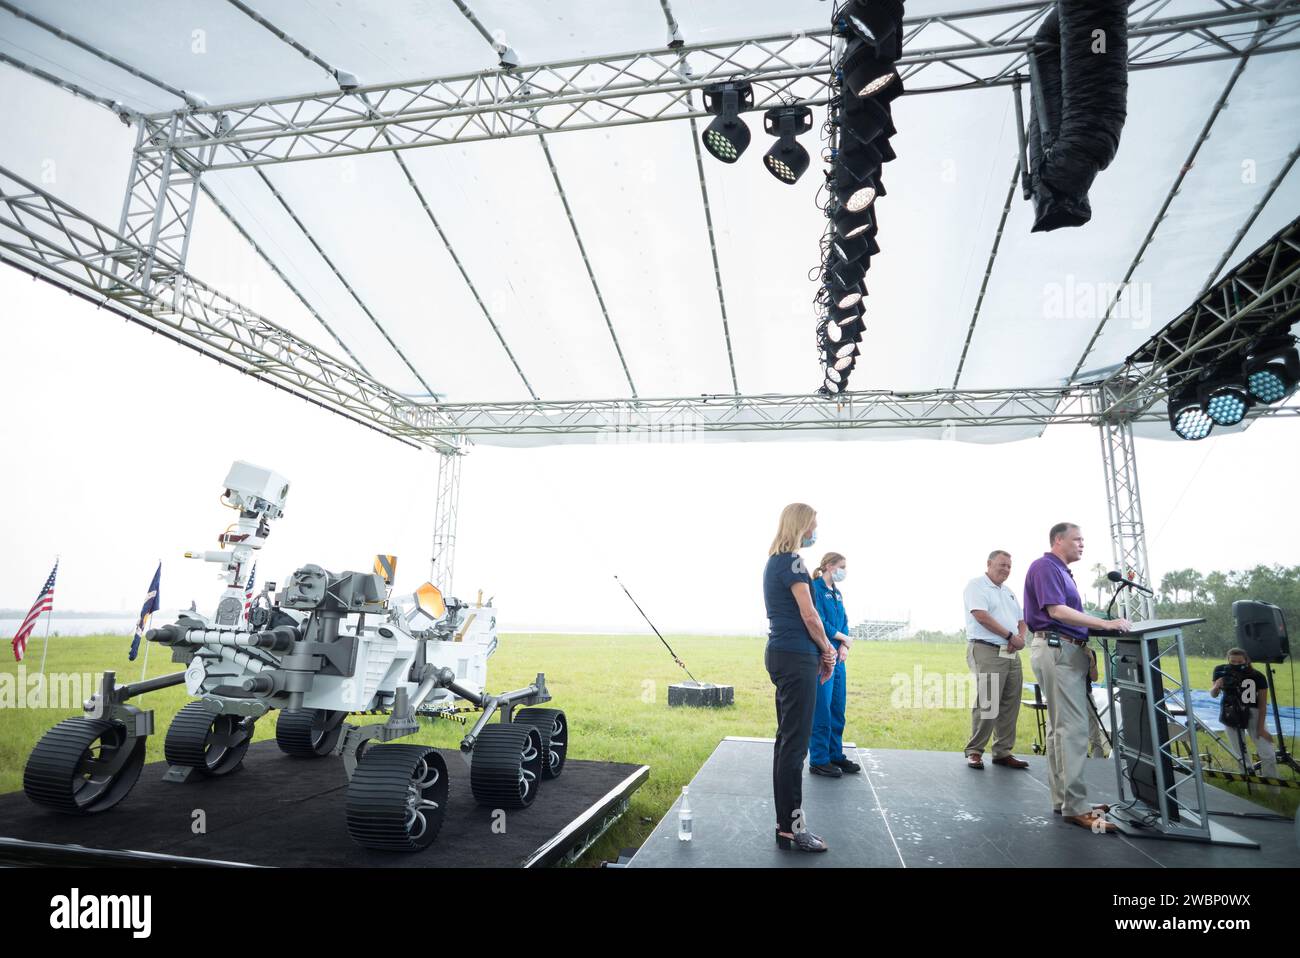 A full-size model of NASA’s Mars 2020 Perseverance rover is seen during a press conference with Kennedy Space Center Deputy Director Janet Petro, left, NASA astronaut Zena Cardman, second from left, NASA Deputy Administrator Jim Morhard, second from right, and NASA Administrator Jim Bridenstine, right, ahead of the launch of NASA’s Mars 2020 Perseverance rover, Wednesday, July 29, 2020, at NASA’s Kennedy Space Center in Florida. The Perseverance rover is part of NASA’s Mars Exploration Program, a long-term effort of robotic exploration of the Red Planet. Launch is scheduled for Thursday, July Stock Photo